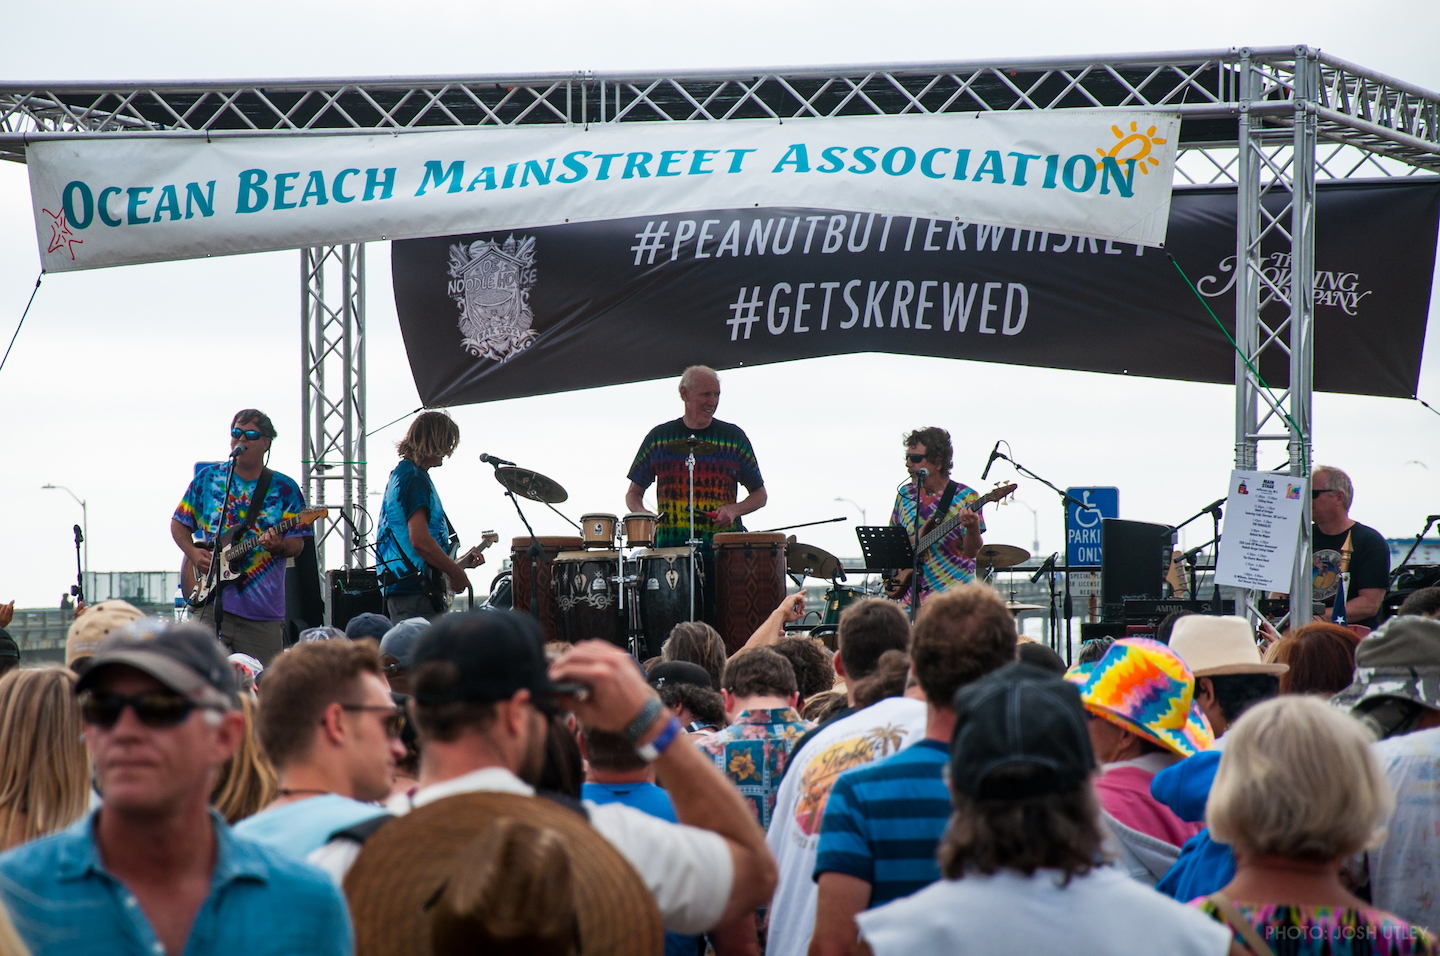 A Dead Head cover band playing on stage in front of an outdoor audience.